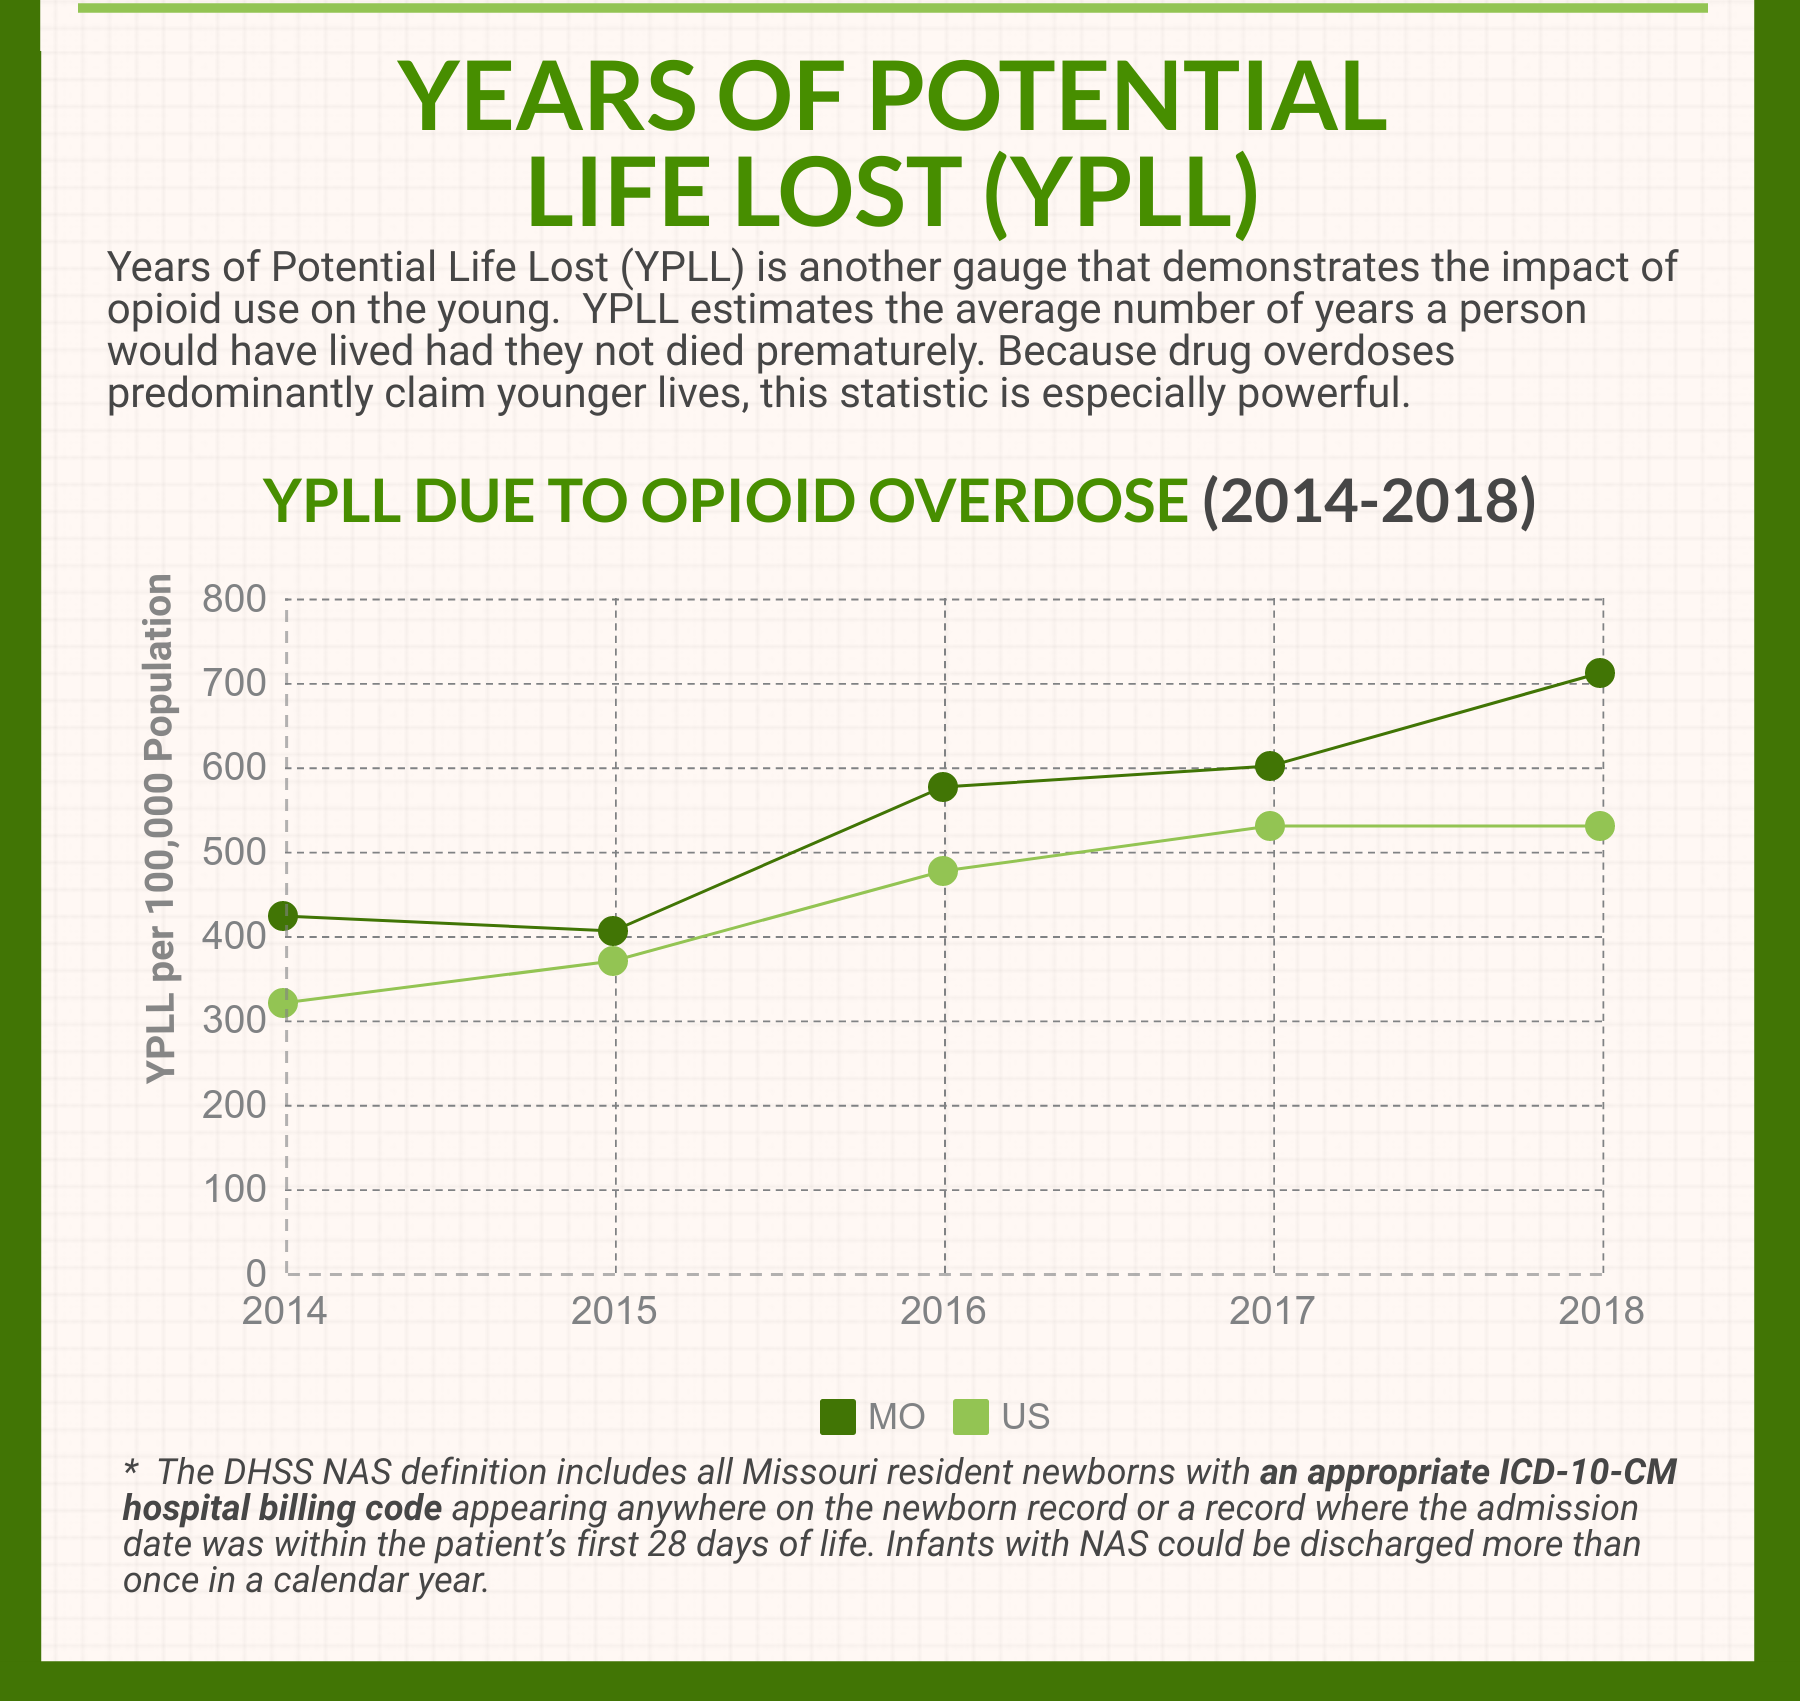 opioid the impact on the future YPLL image